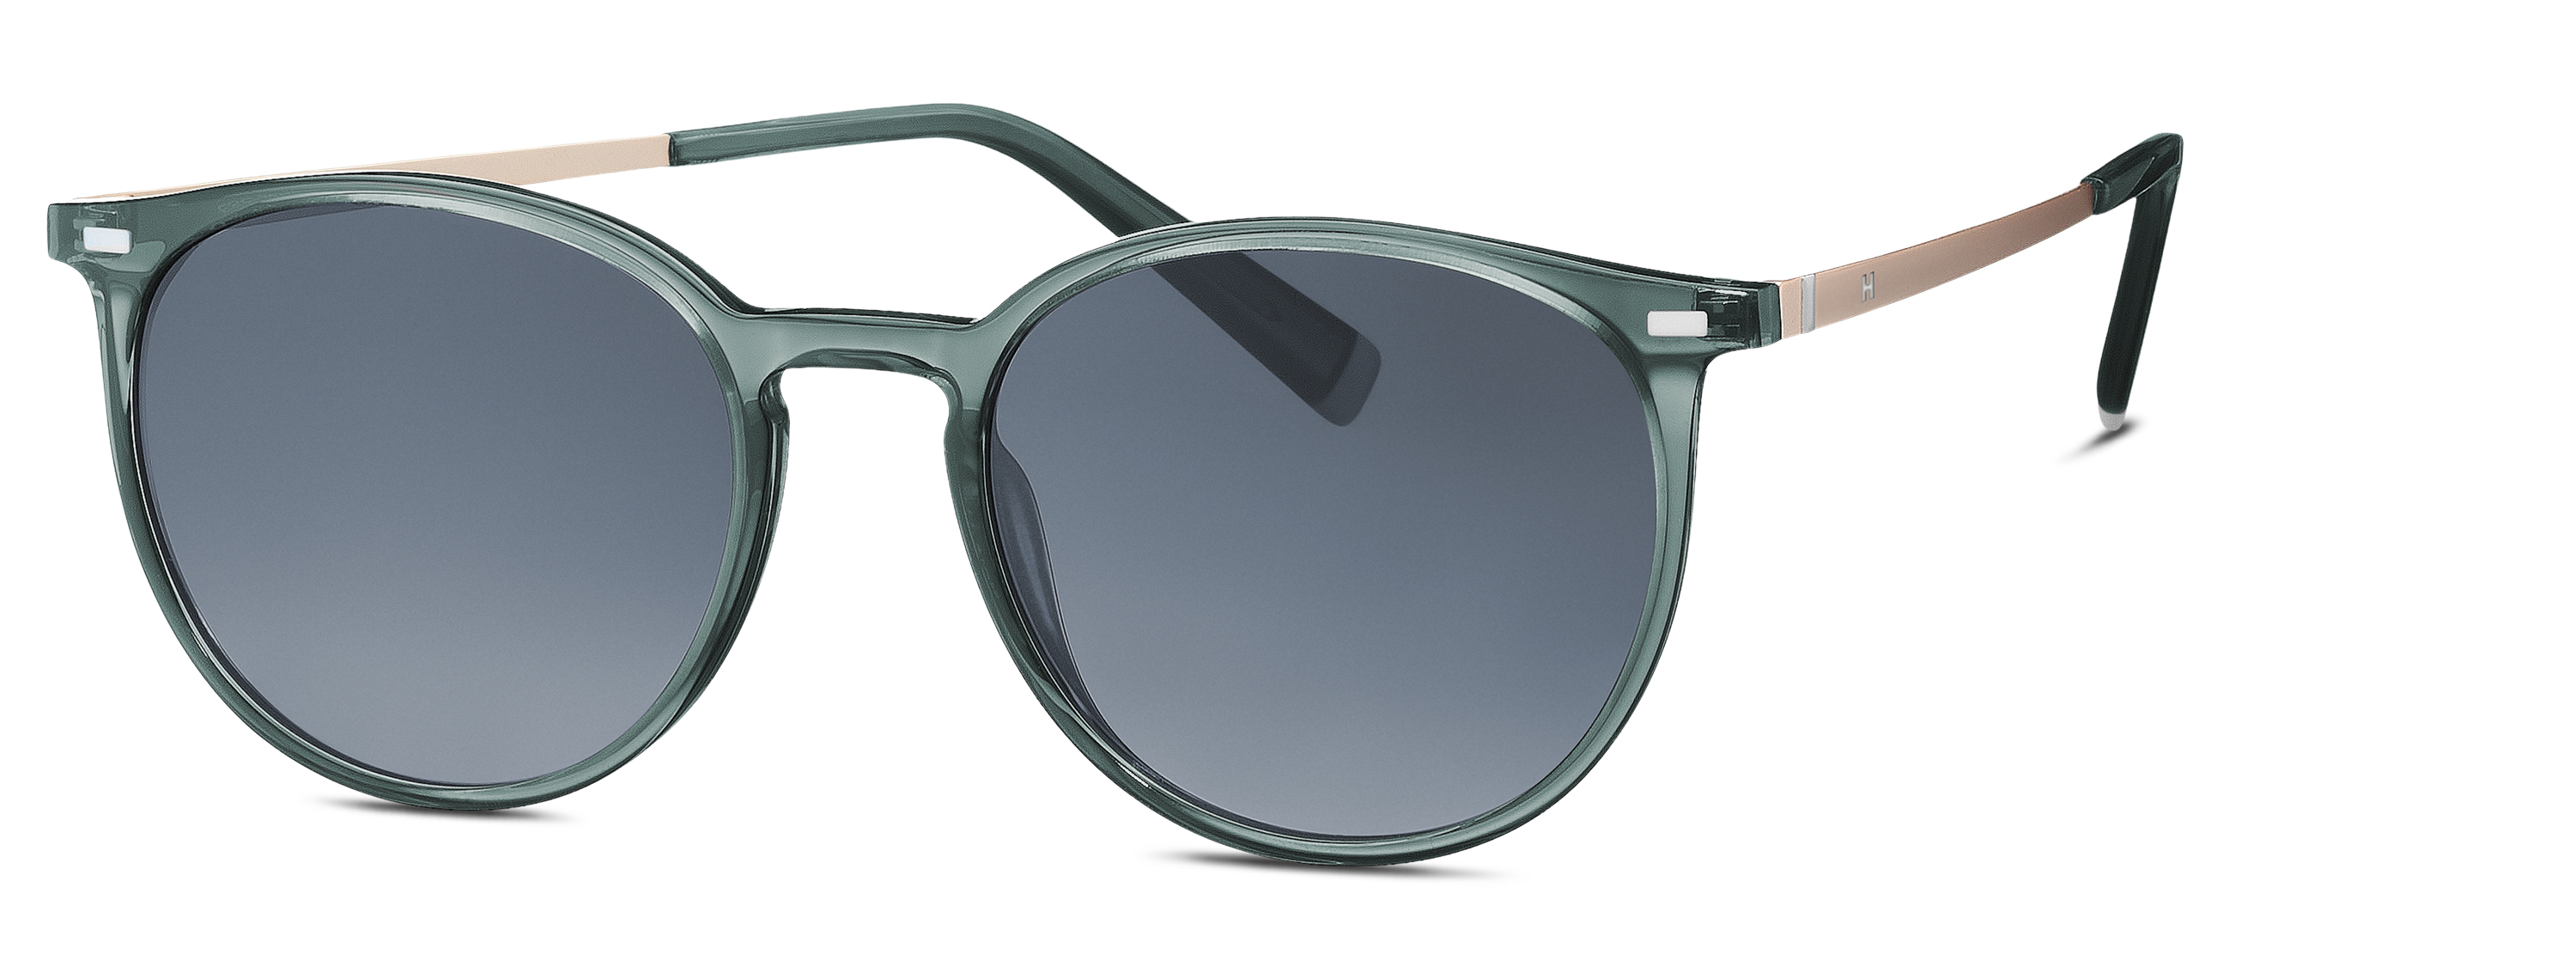 [products.image.front] HUMPHREY´S eyewear 585329 43 Sonnenbrille